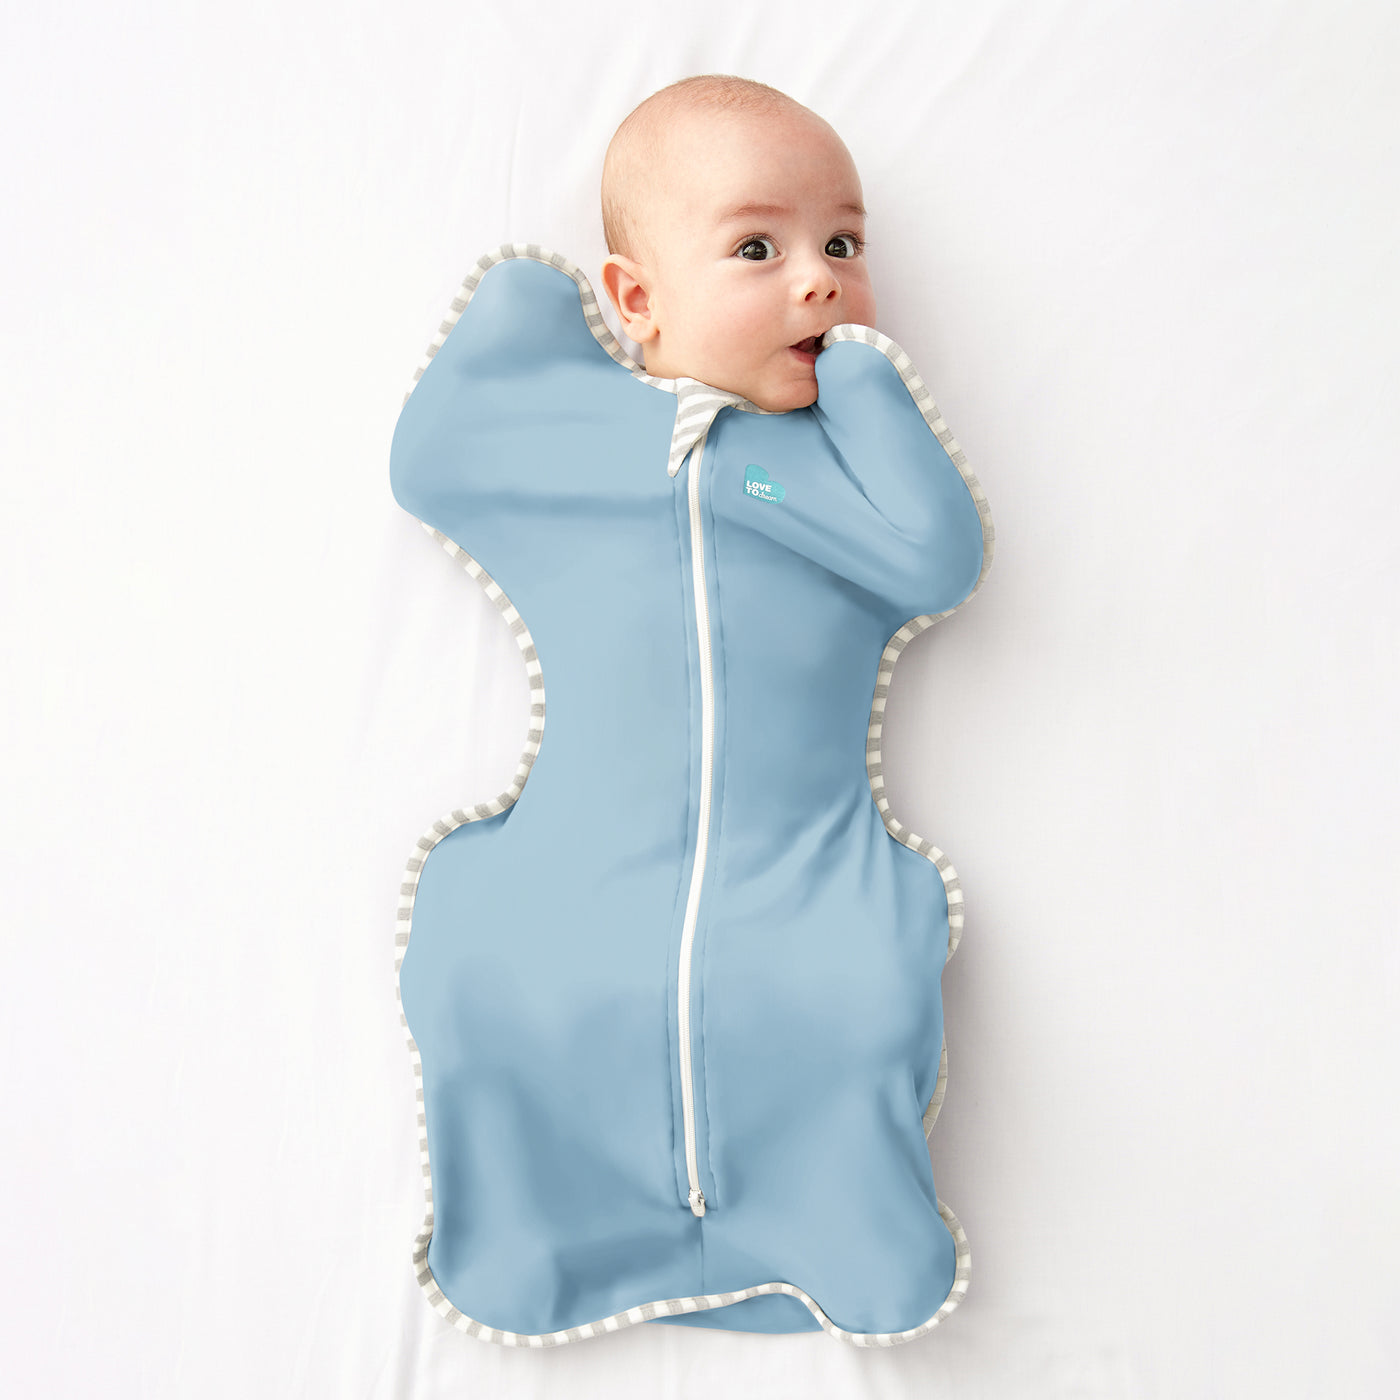 The Swaddle Up™ is the only zip-up swaddle with patented “wings” that allows your baby to sleep in a natural Arms Up™ position for true Self-Soothing™. 